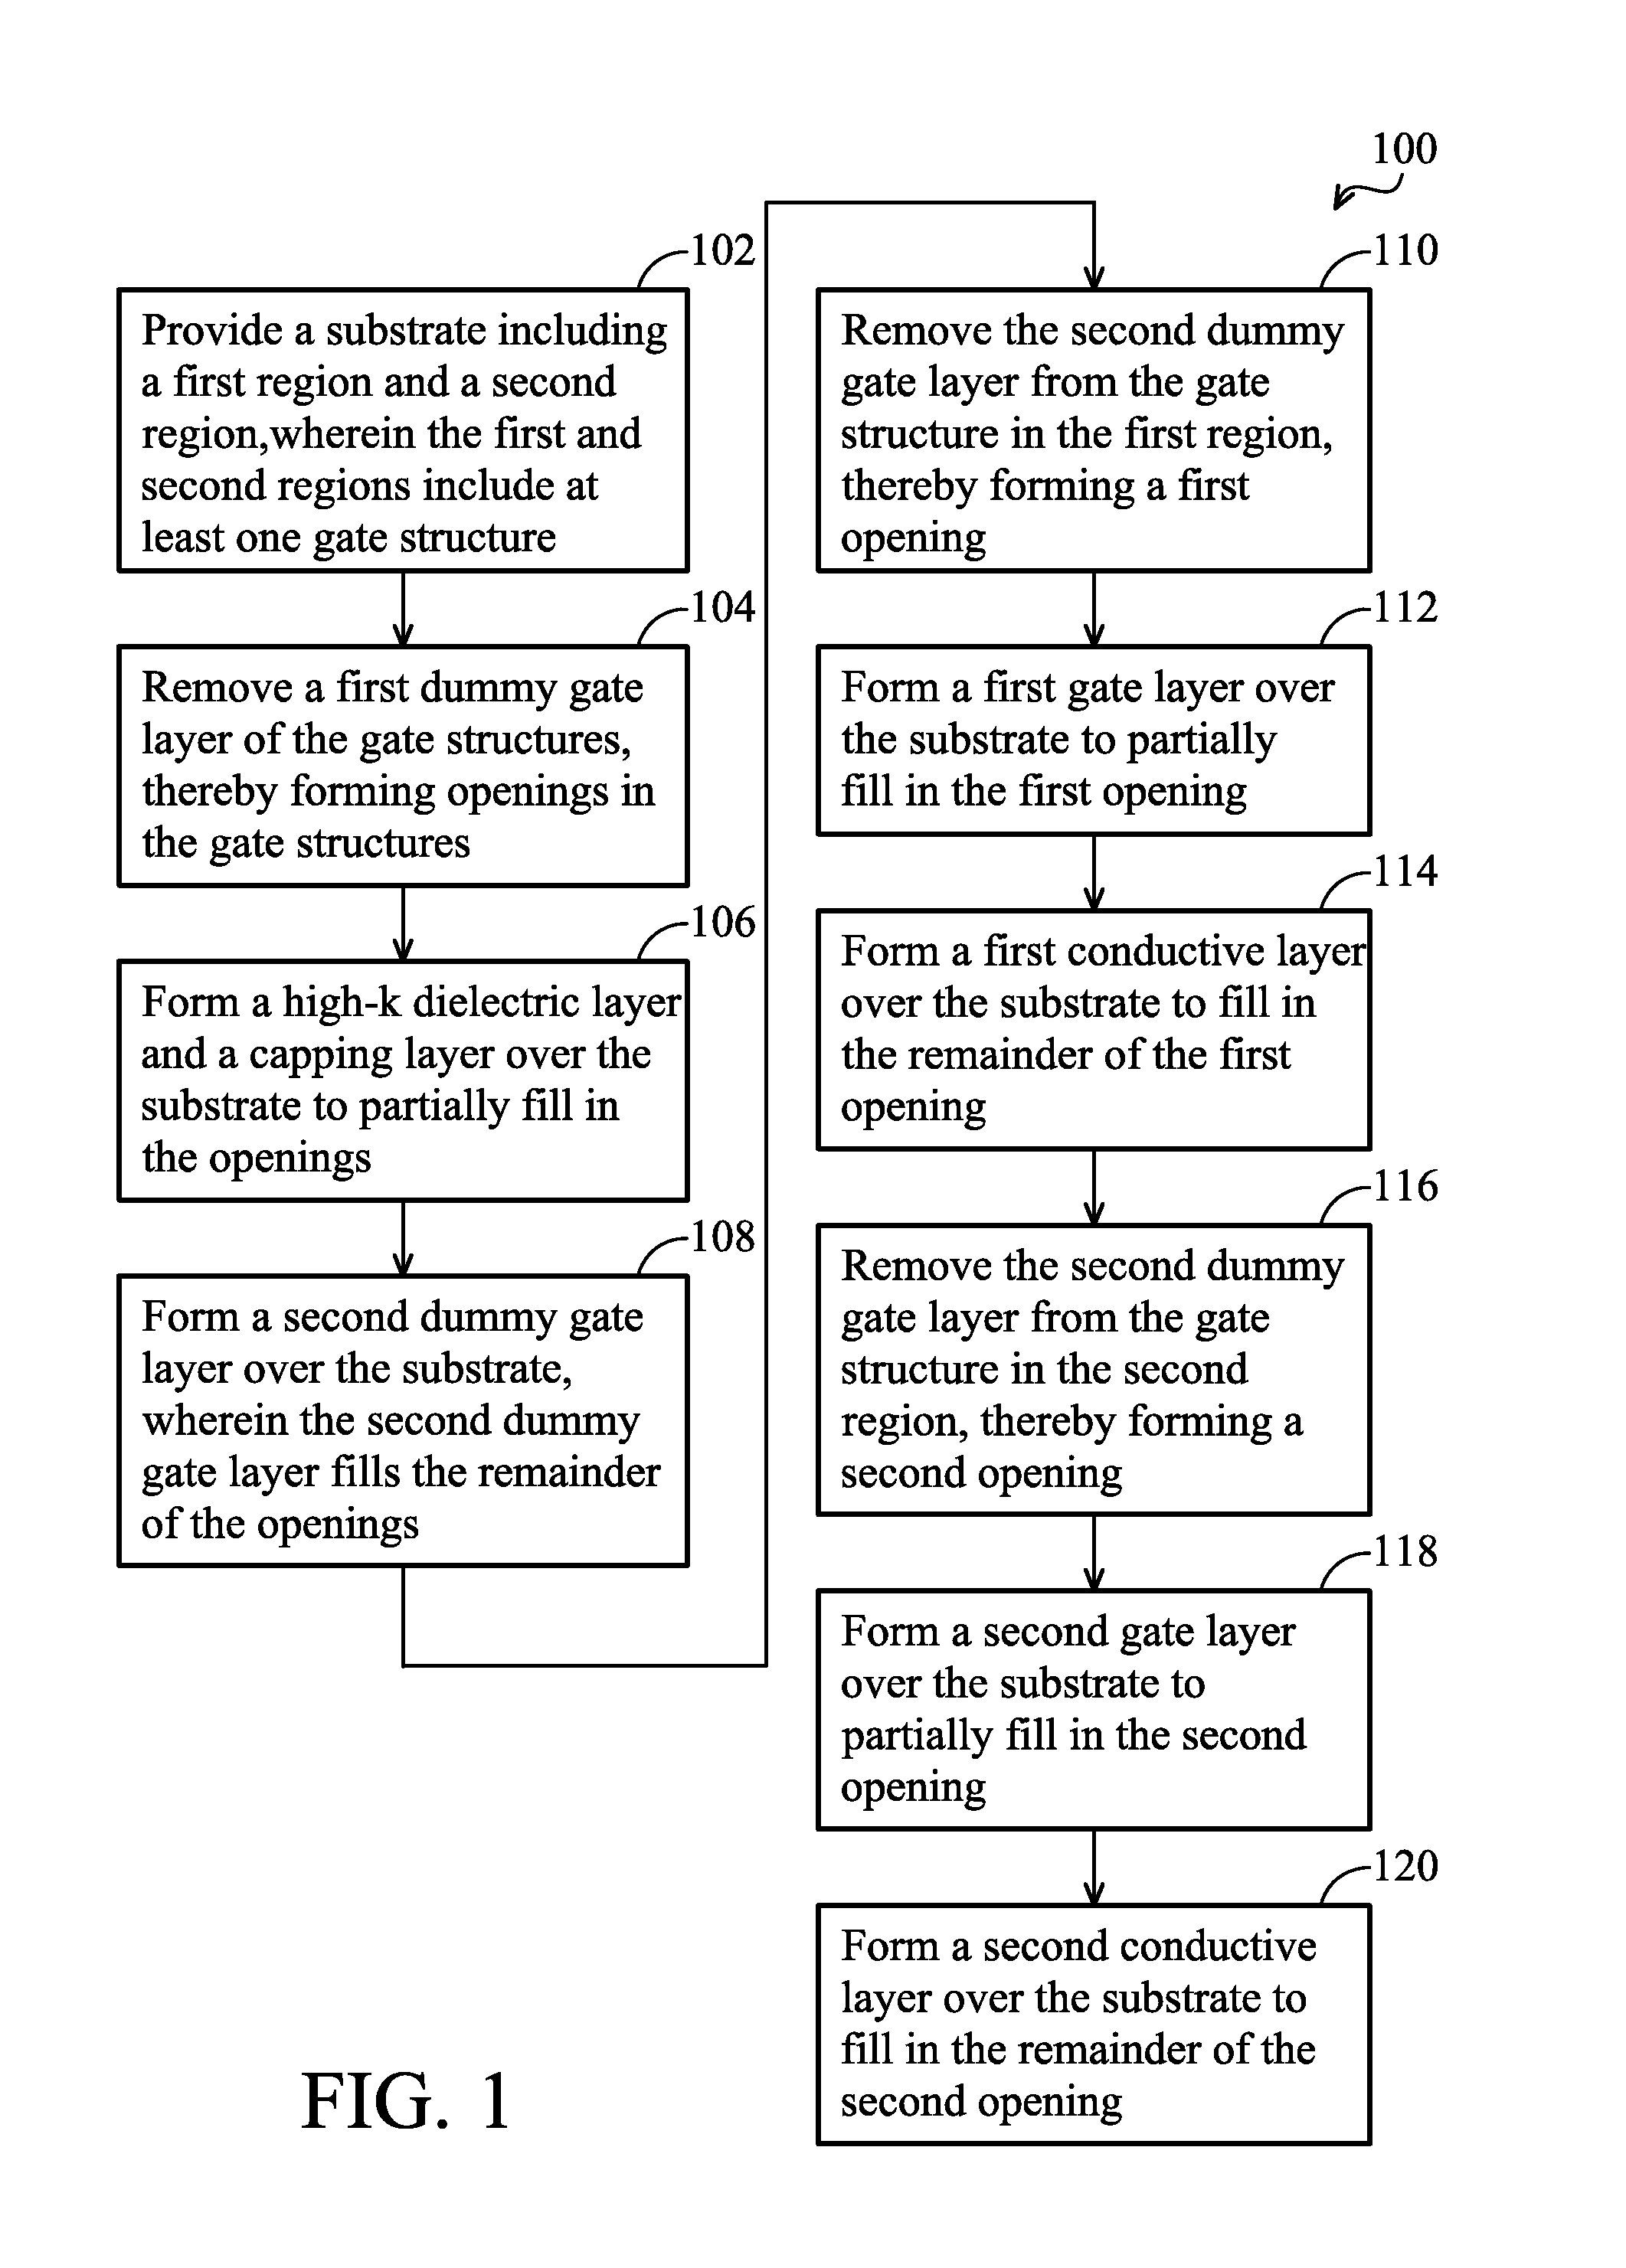 Methods for a gate replacement process